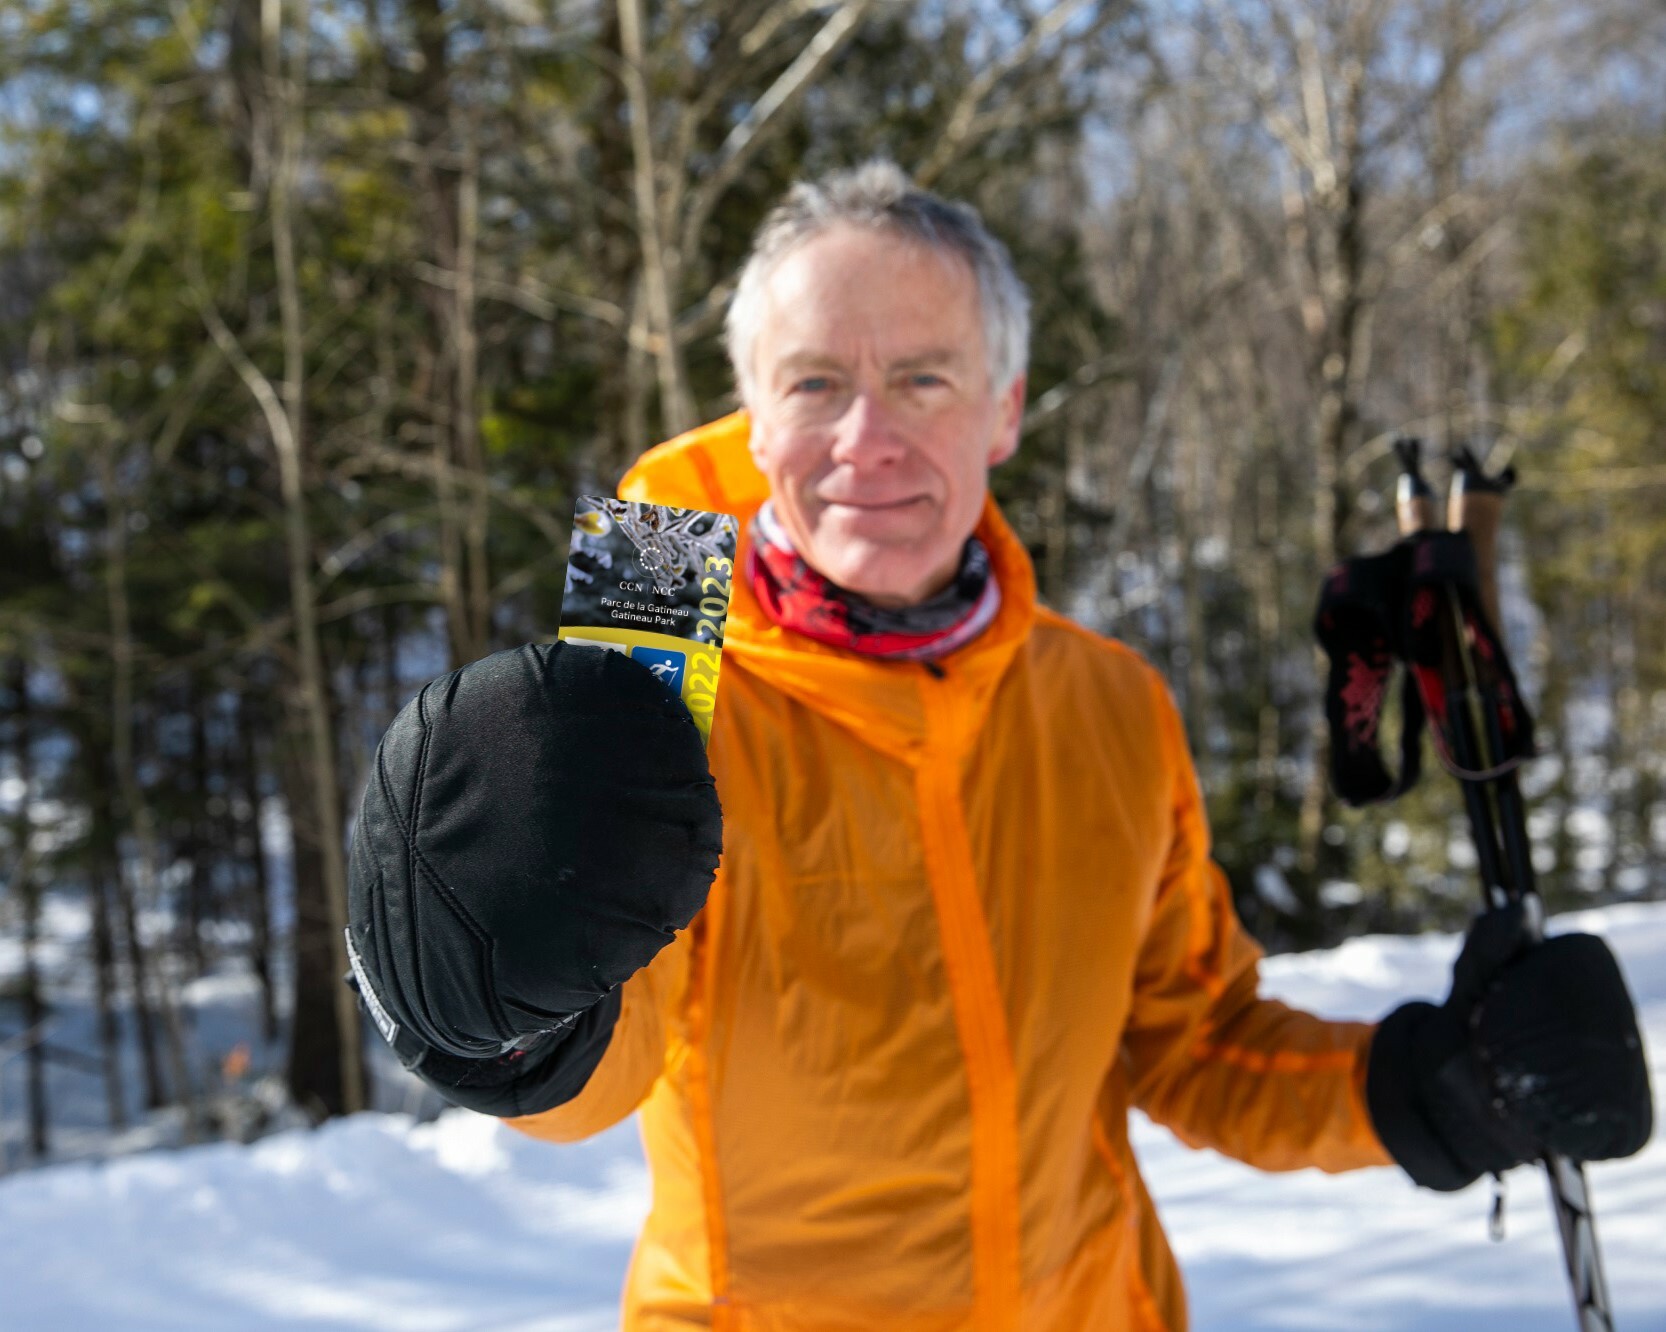 A Gatineau Park skier showing his 2023 winter pass.